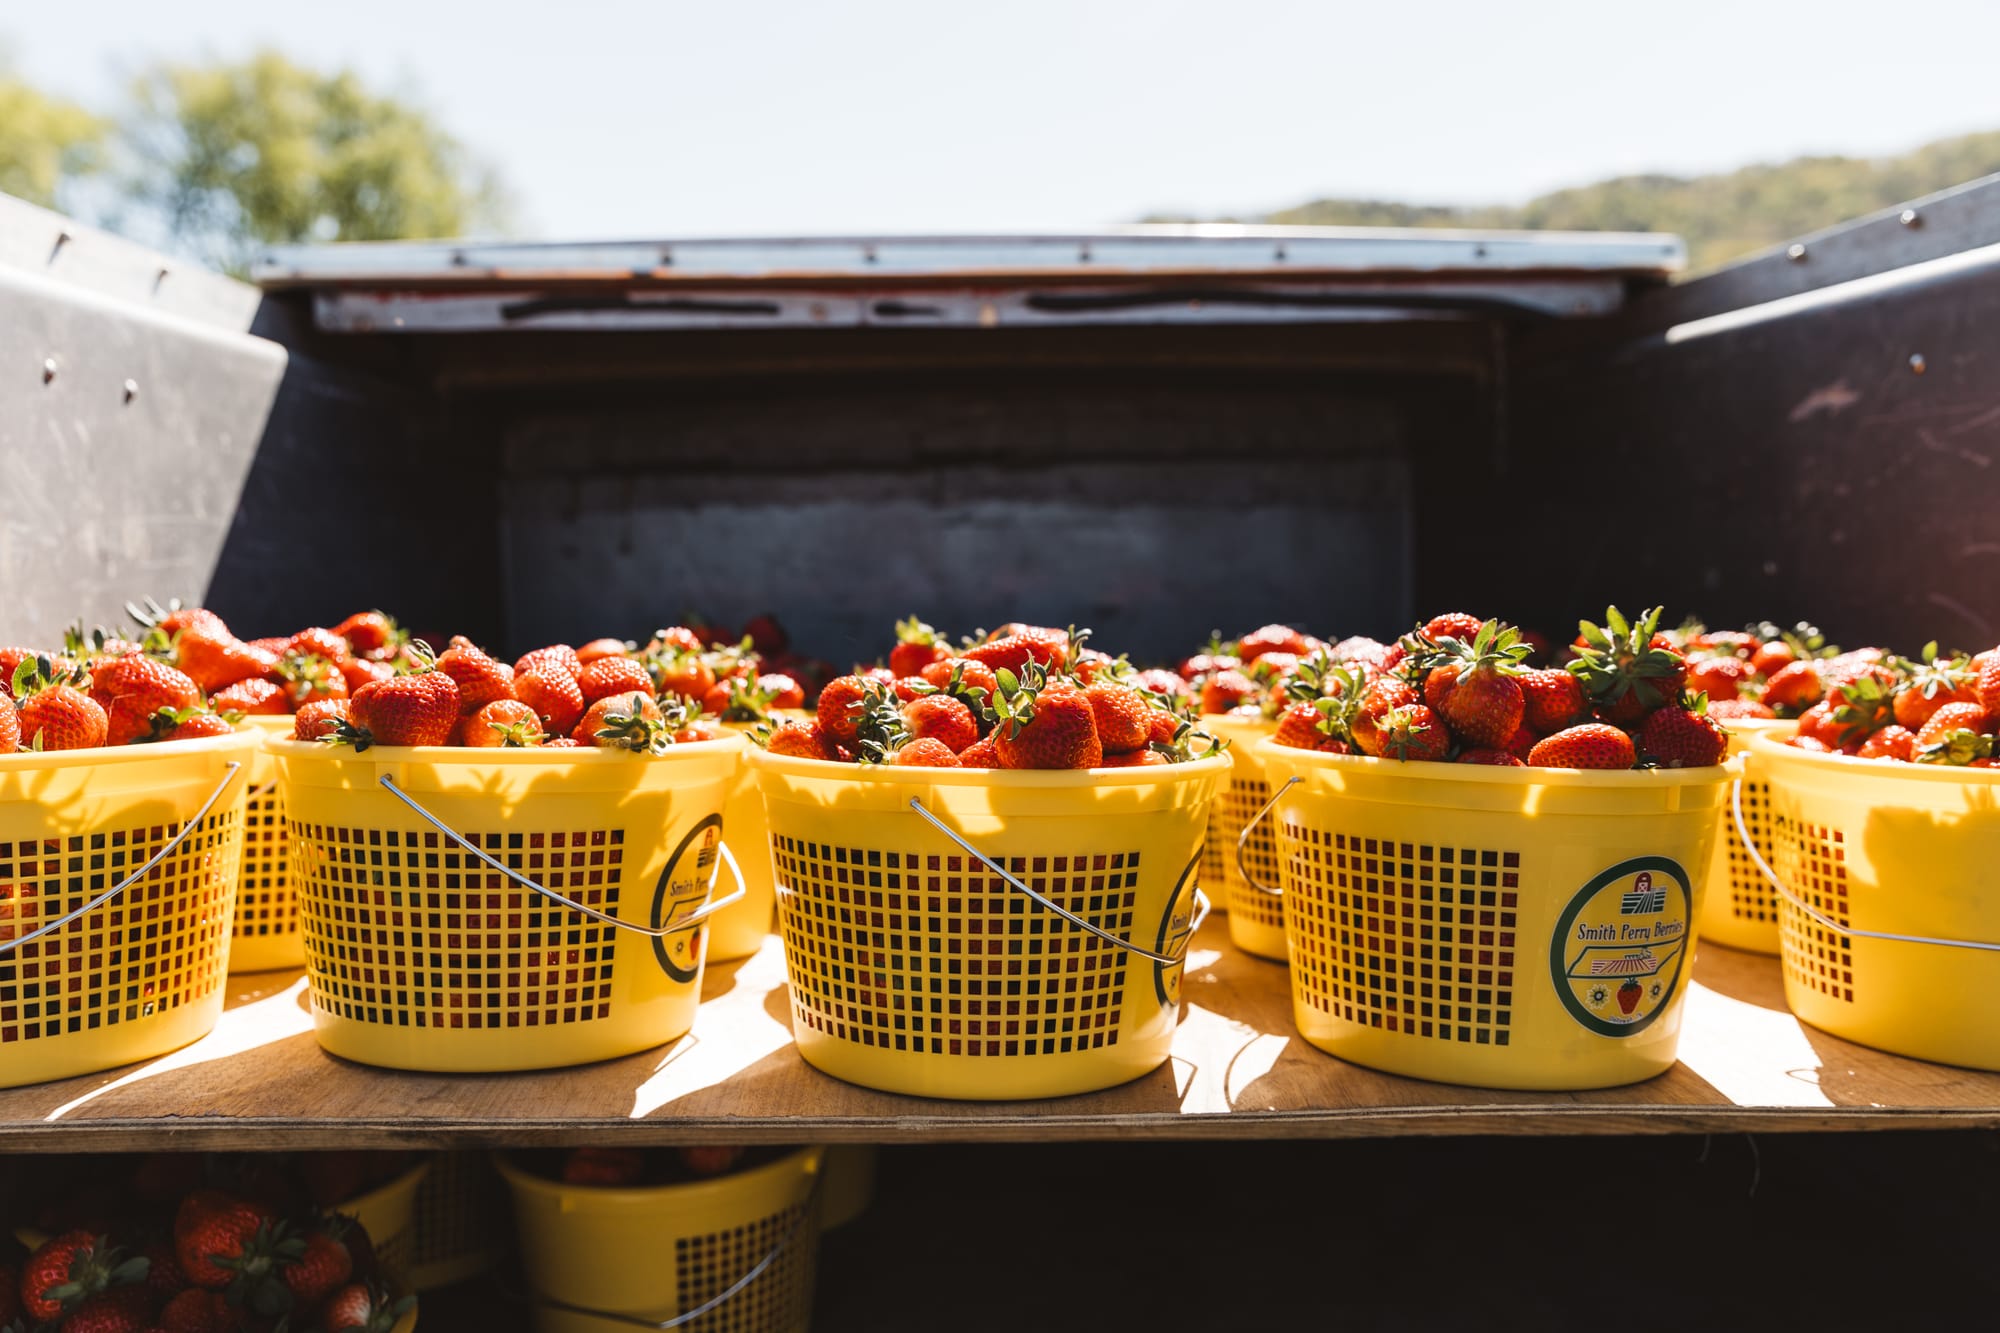 Aubie Smith's strawberries and the many sweet reasons we buy them.